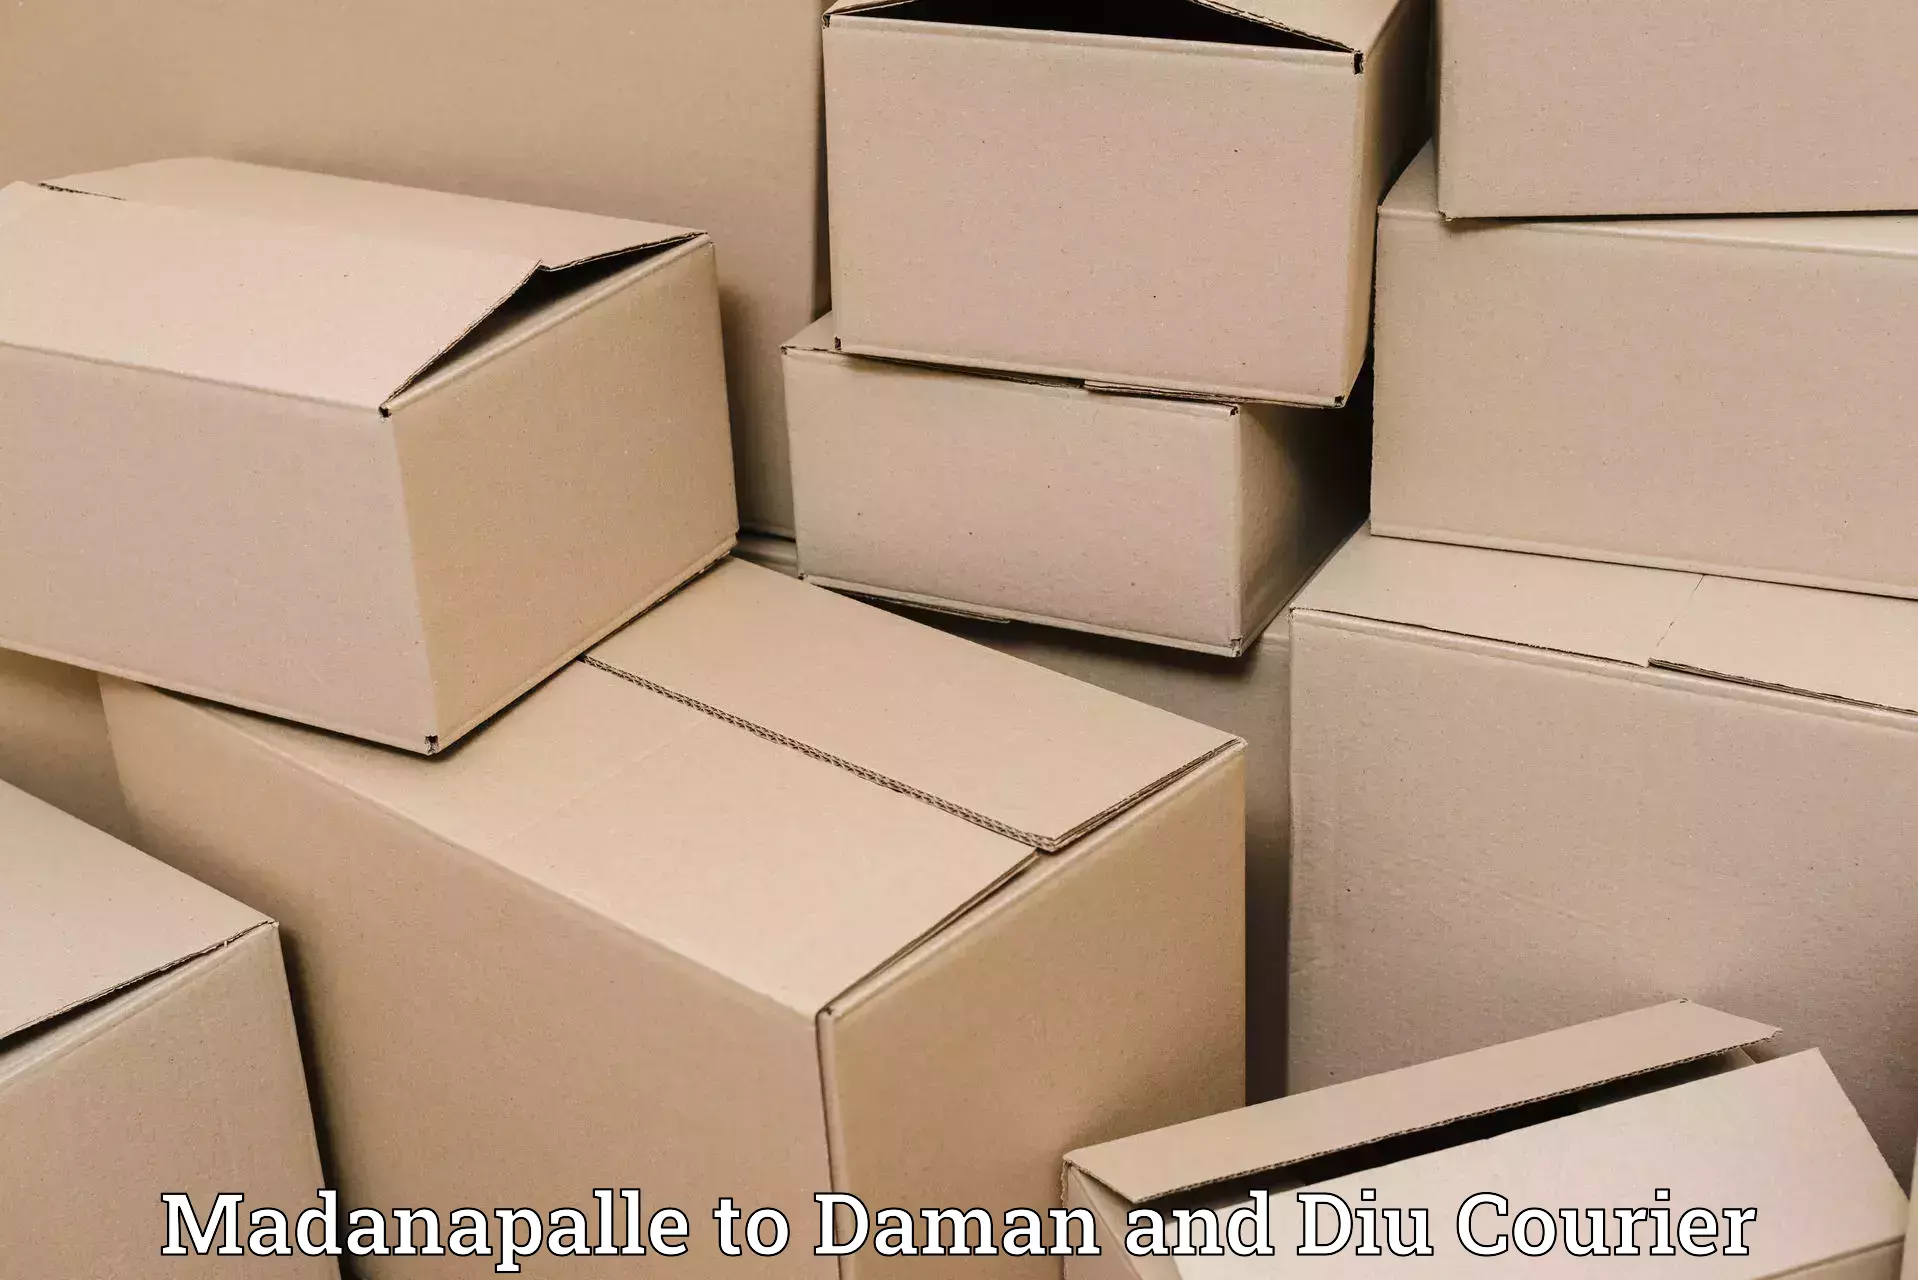 Parcel delivery automation Madanapalle to Diu